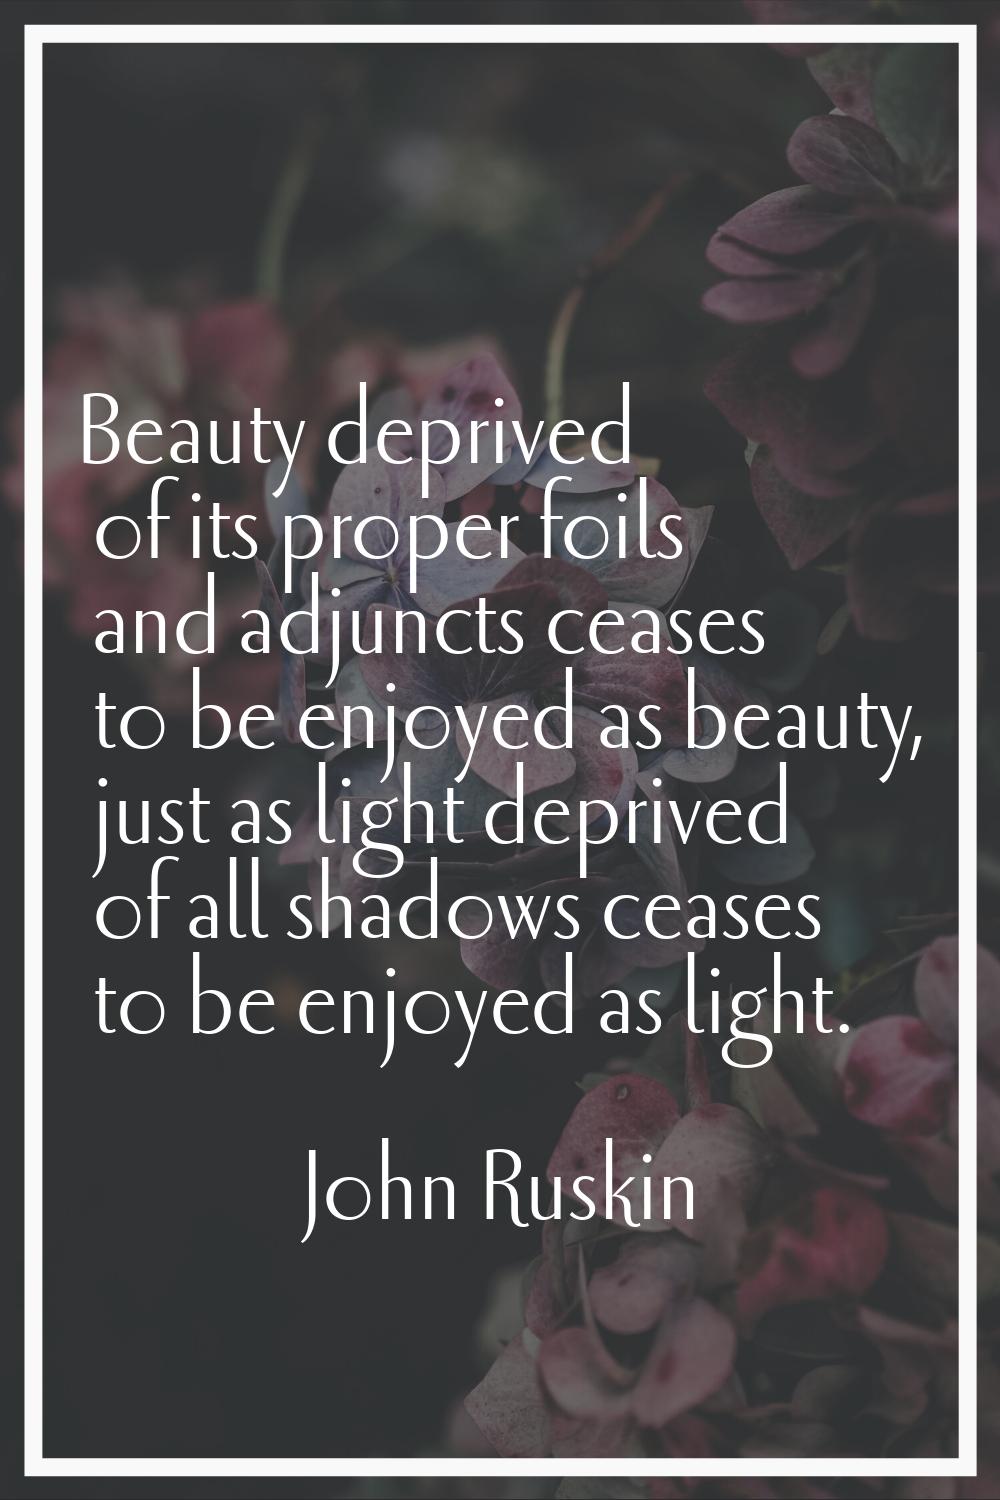 Beauty deprived of its proper foils and adjuncts ceases to be enjoyed as beauty, just as light depr